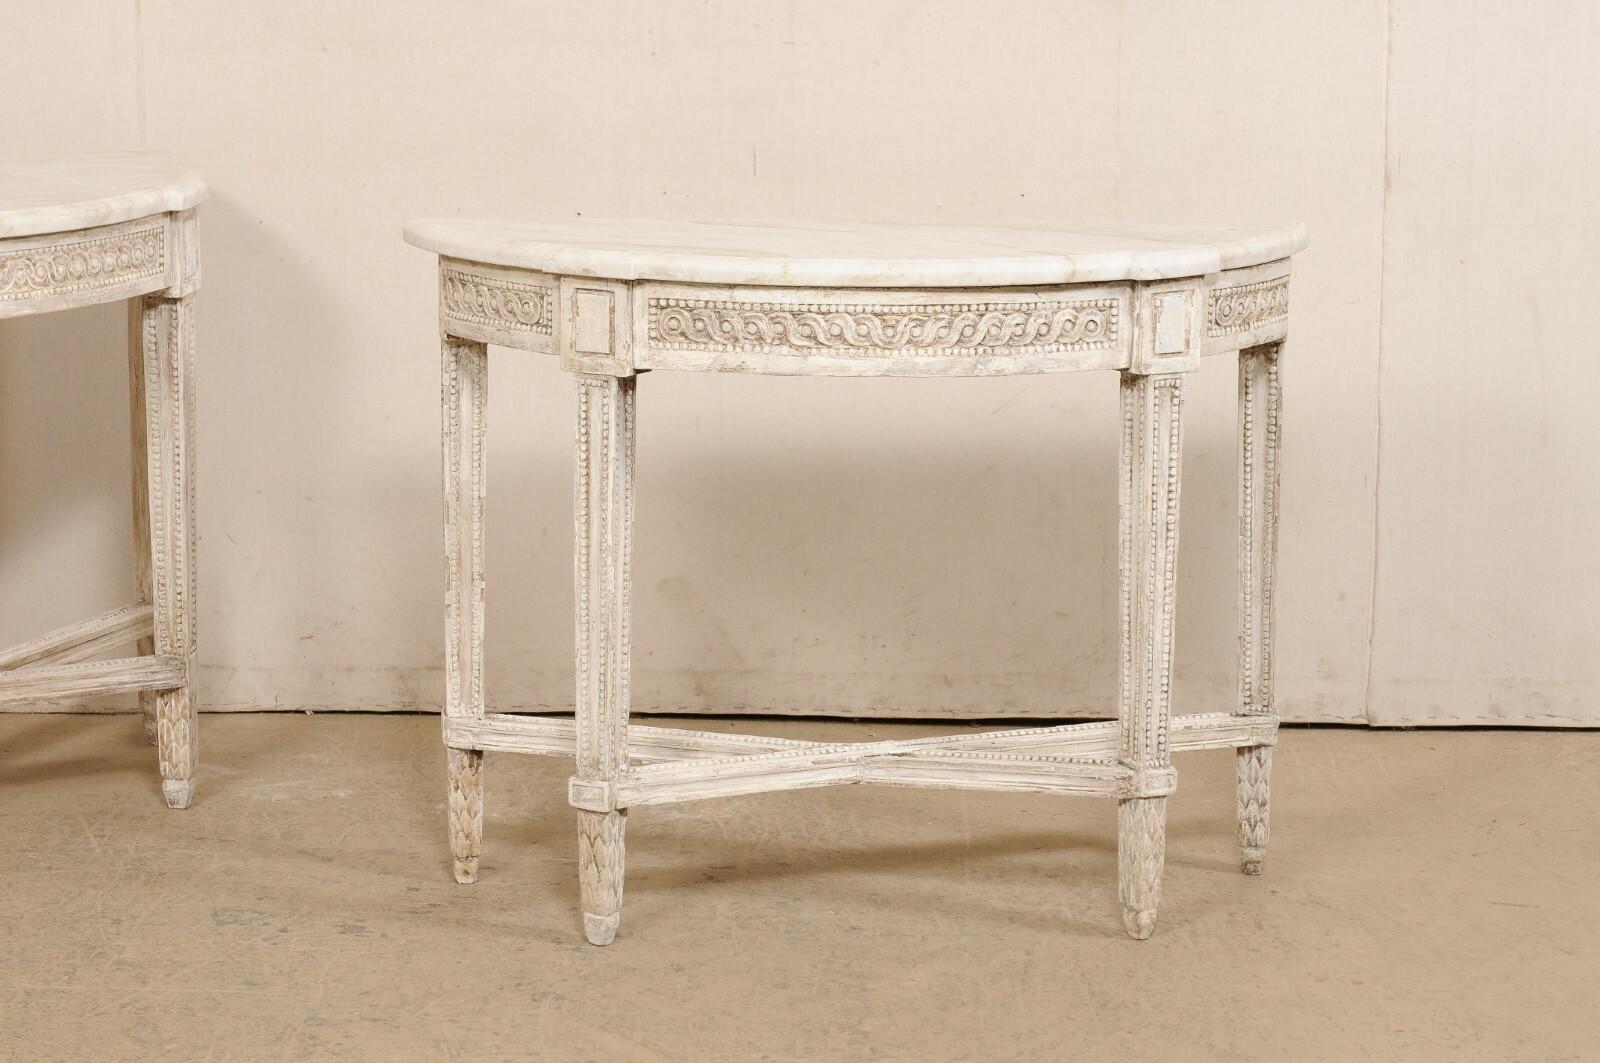 An Italian pair of nicely carved demi lune tables with quartzite tops from the 18th century. This pair of console tables from Italy are adorn in fabulously detailed carvings; with petite bead trim outlining the apron, legs, & stretchers. A carved